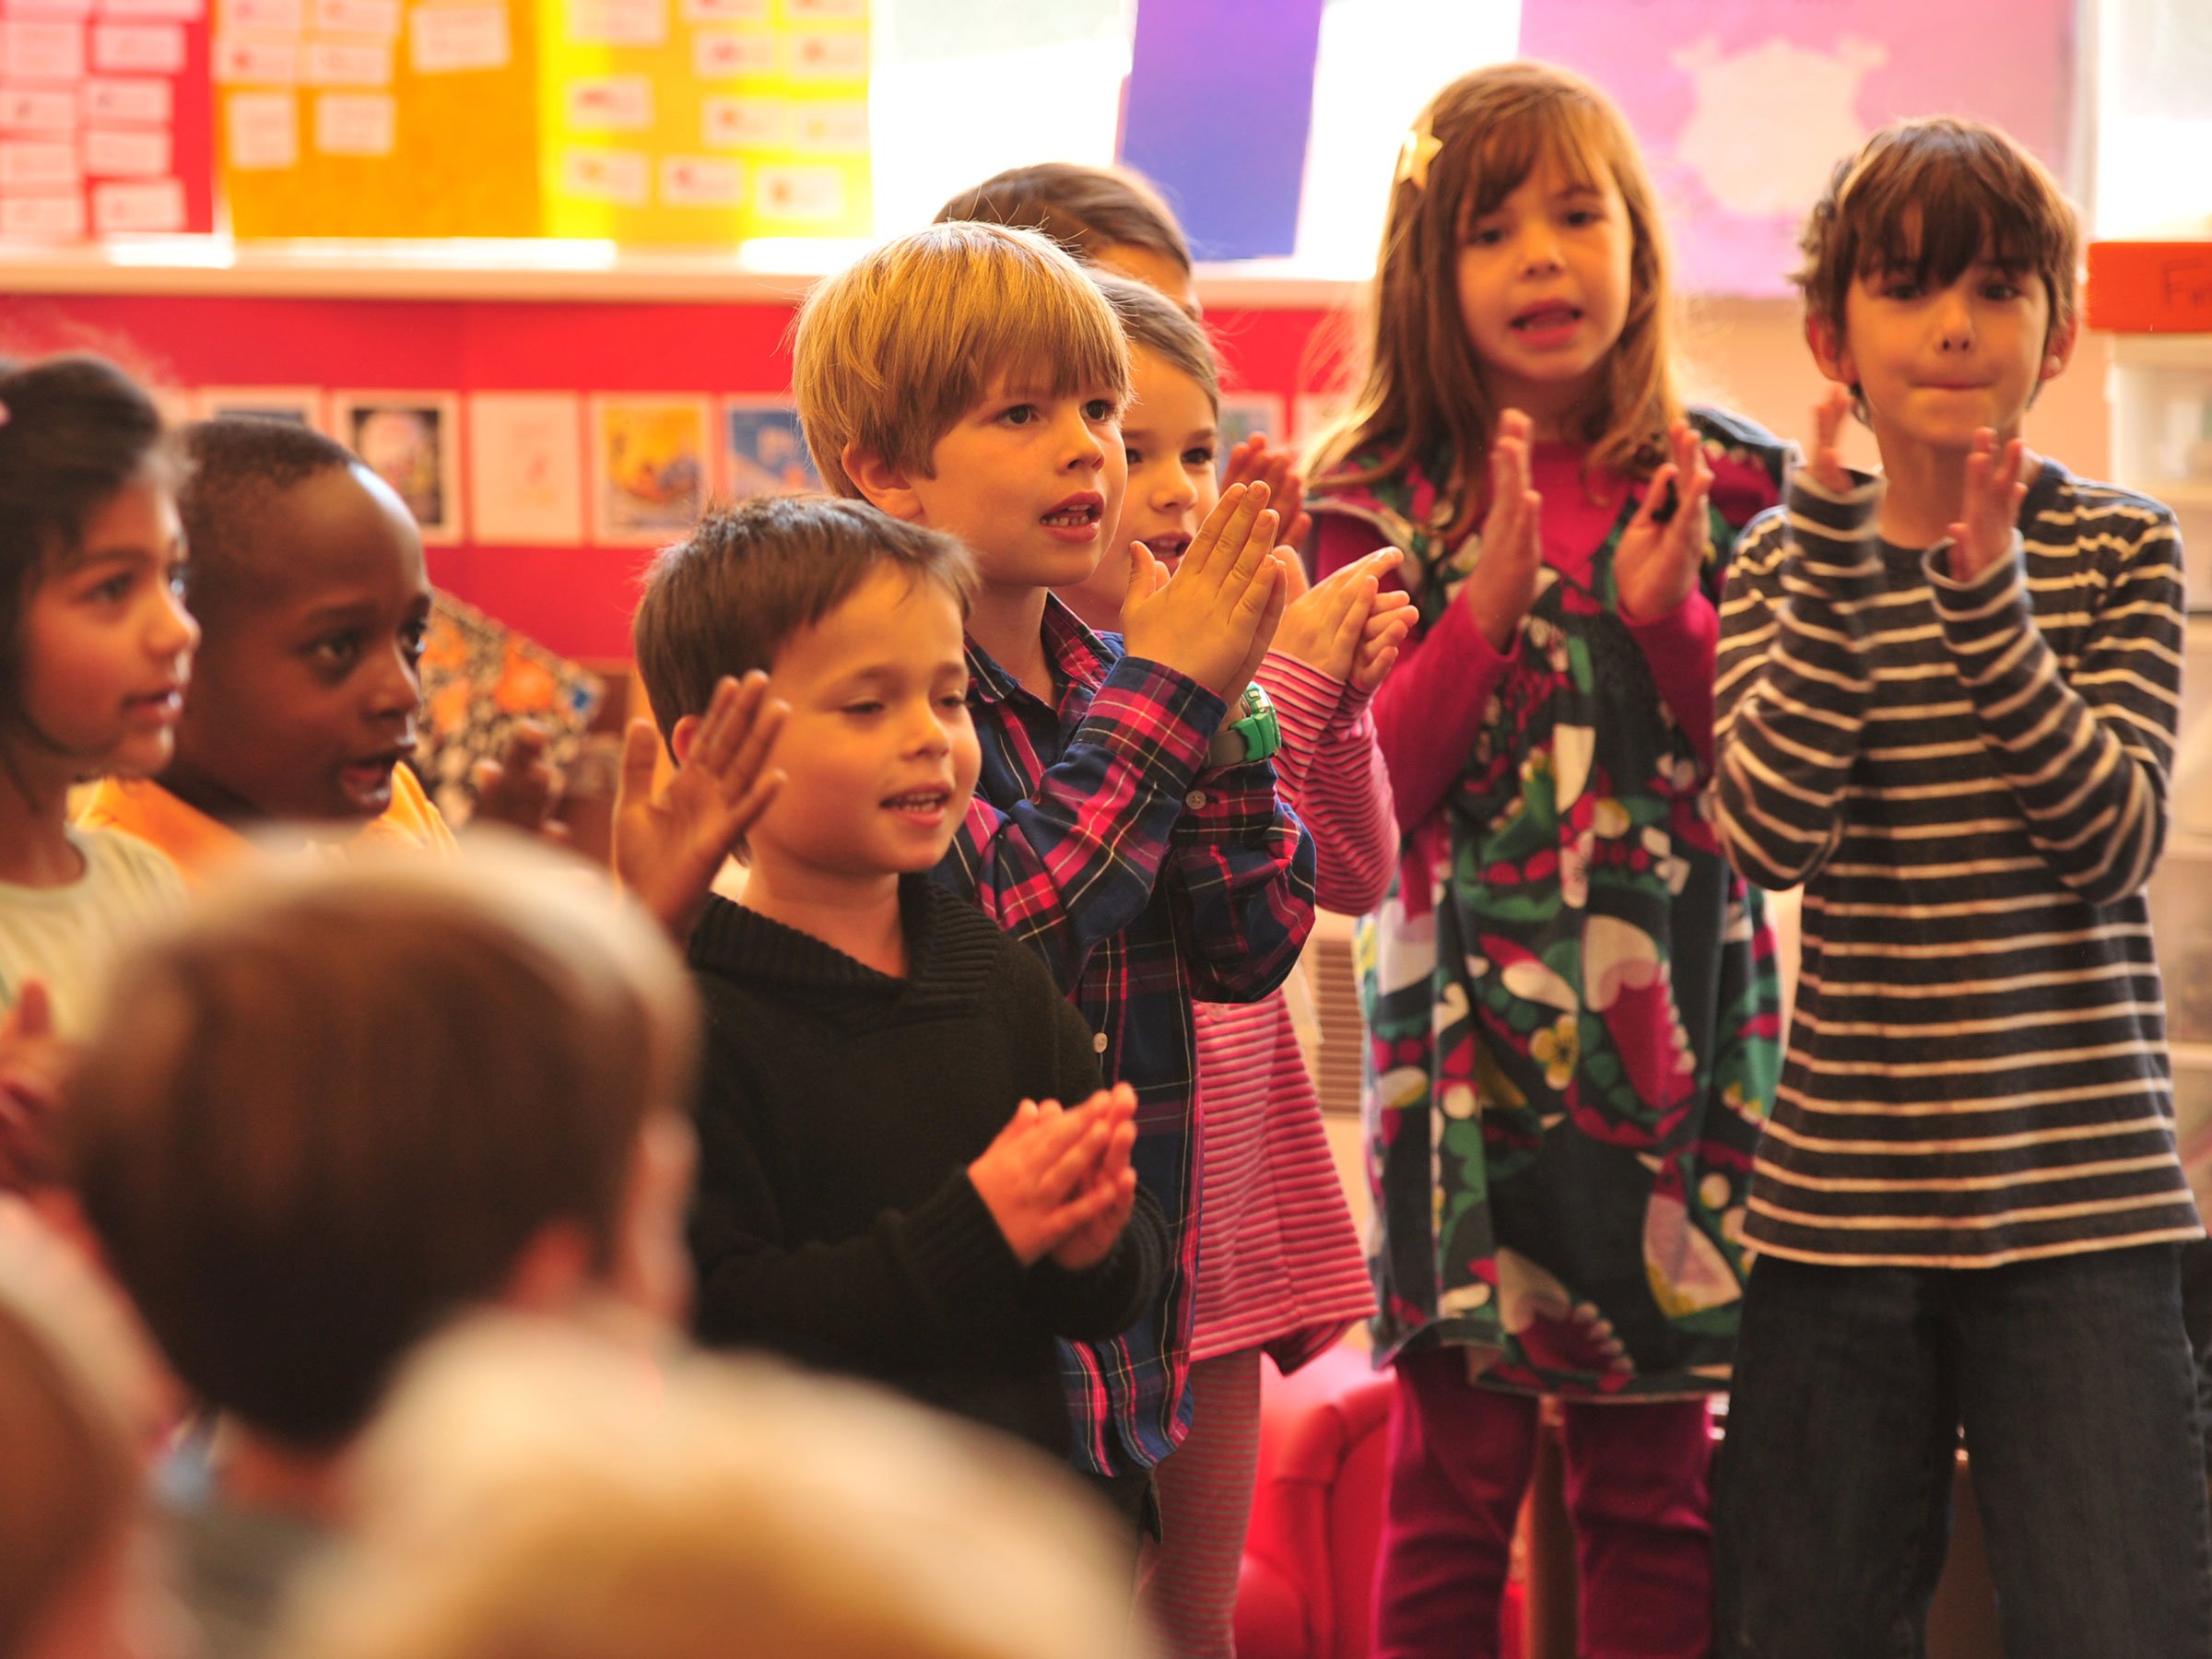 Children in a classroom clapping